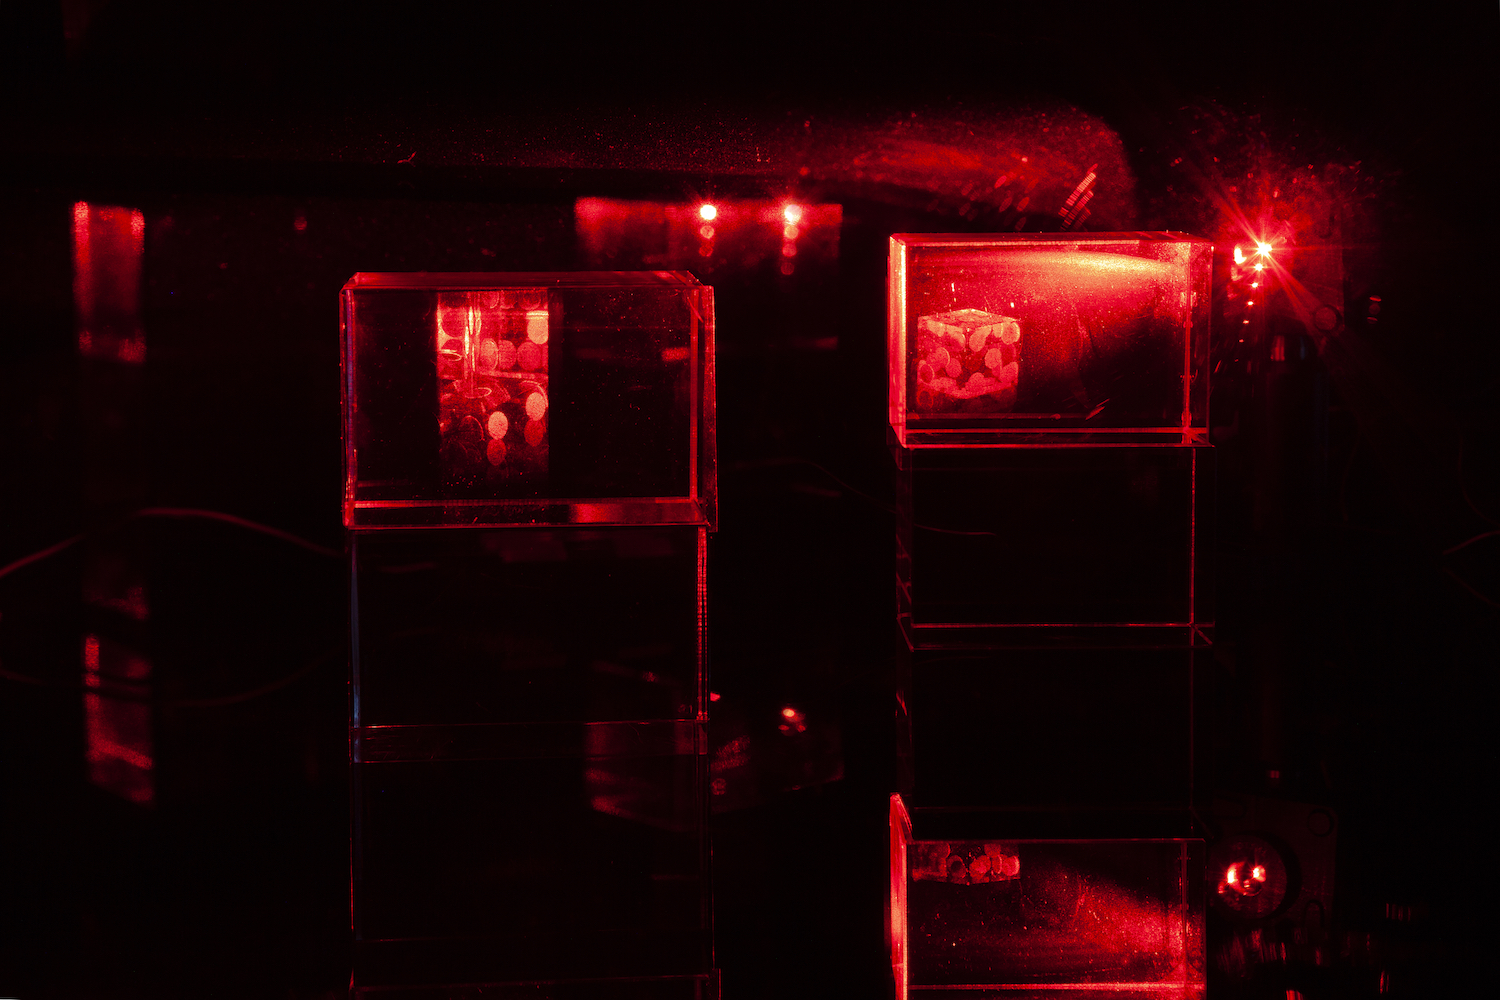 Constantina Zavitsanos, *Boxed Bet*, 2019. Transmission holograms, acrylic mounts, 5mW red laser. Detail view

[image description: Against a darkened black background, two glowing red holograms on dimensional clear acrylic mounts. Holographic images of dice mid-roll are lit by a red laser. The light reflects against the black plexiglass surface on which the holograms sit.]